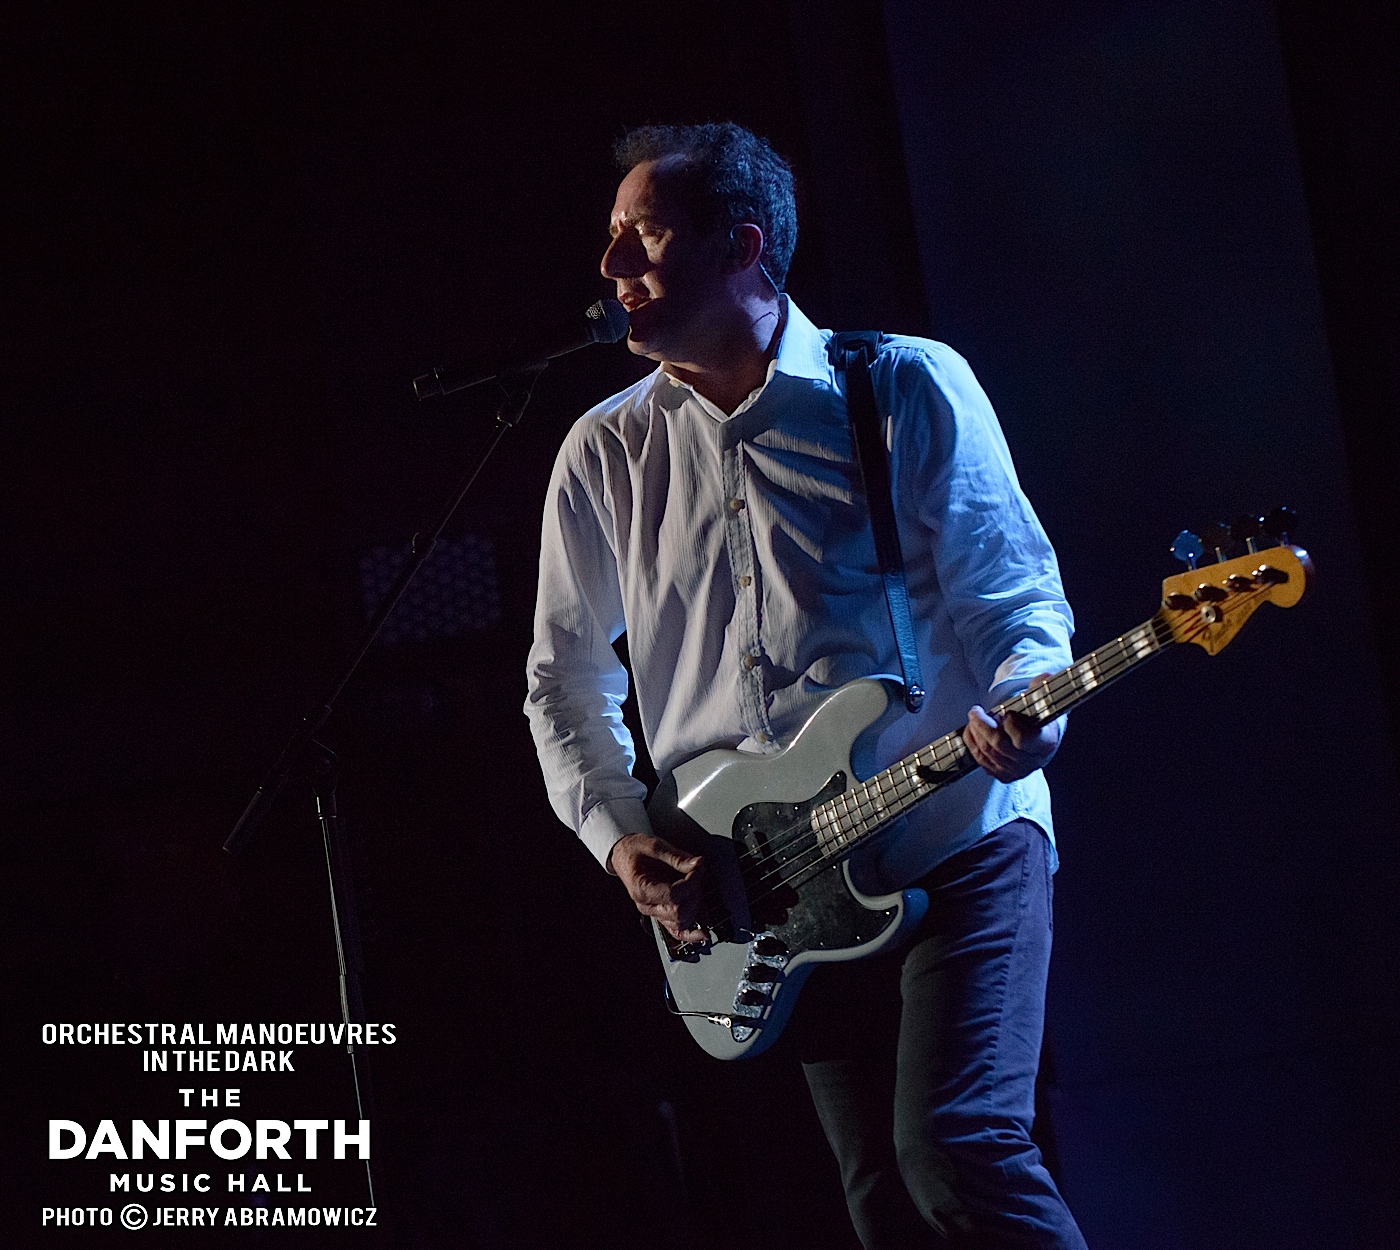 20130711 Orchestral Manoeuvres in the Dark at The Danforth Music Hall 0242